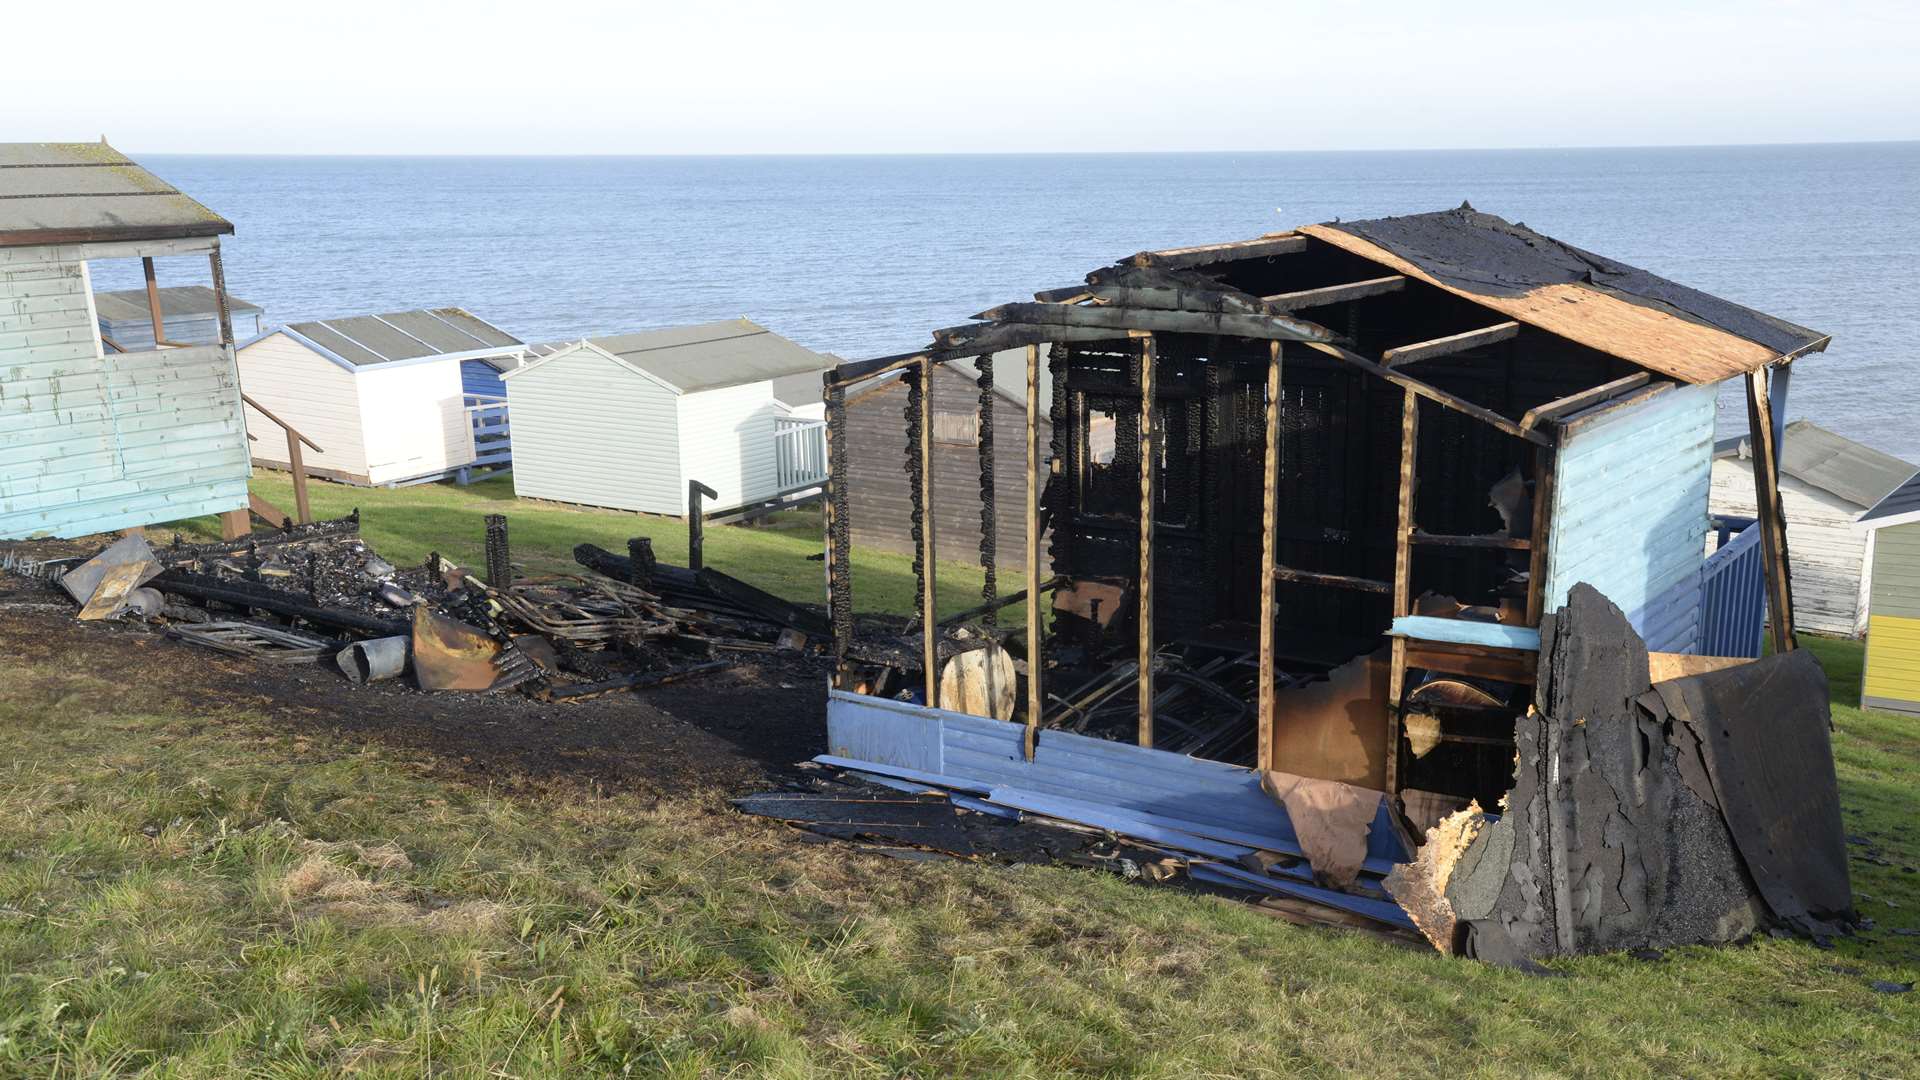 One of the burnt out beach huts on Tankerton slopes